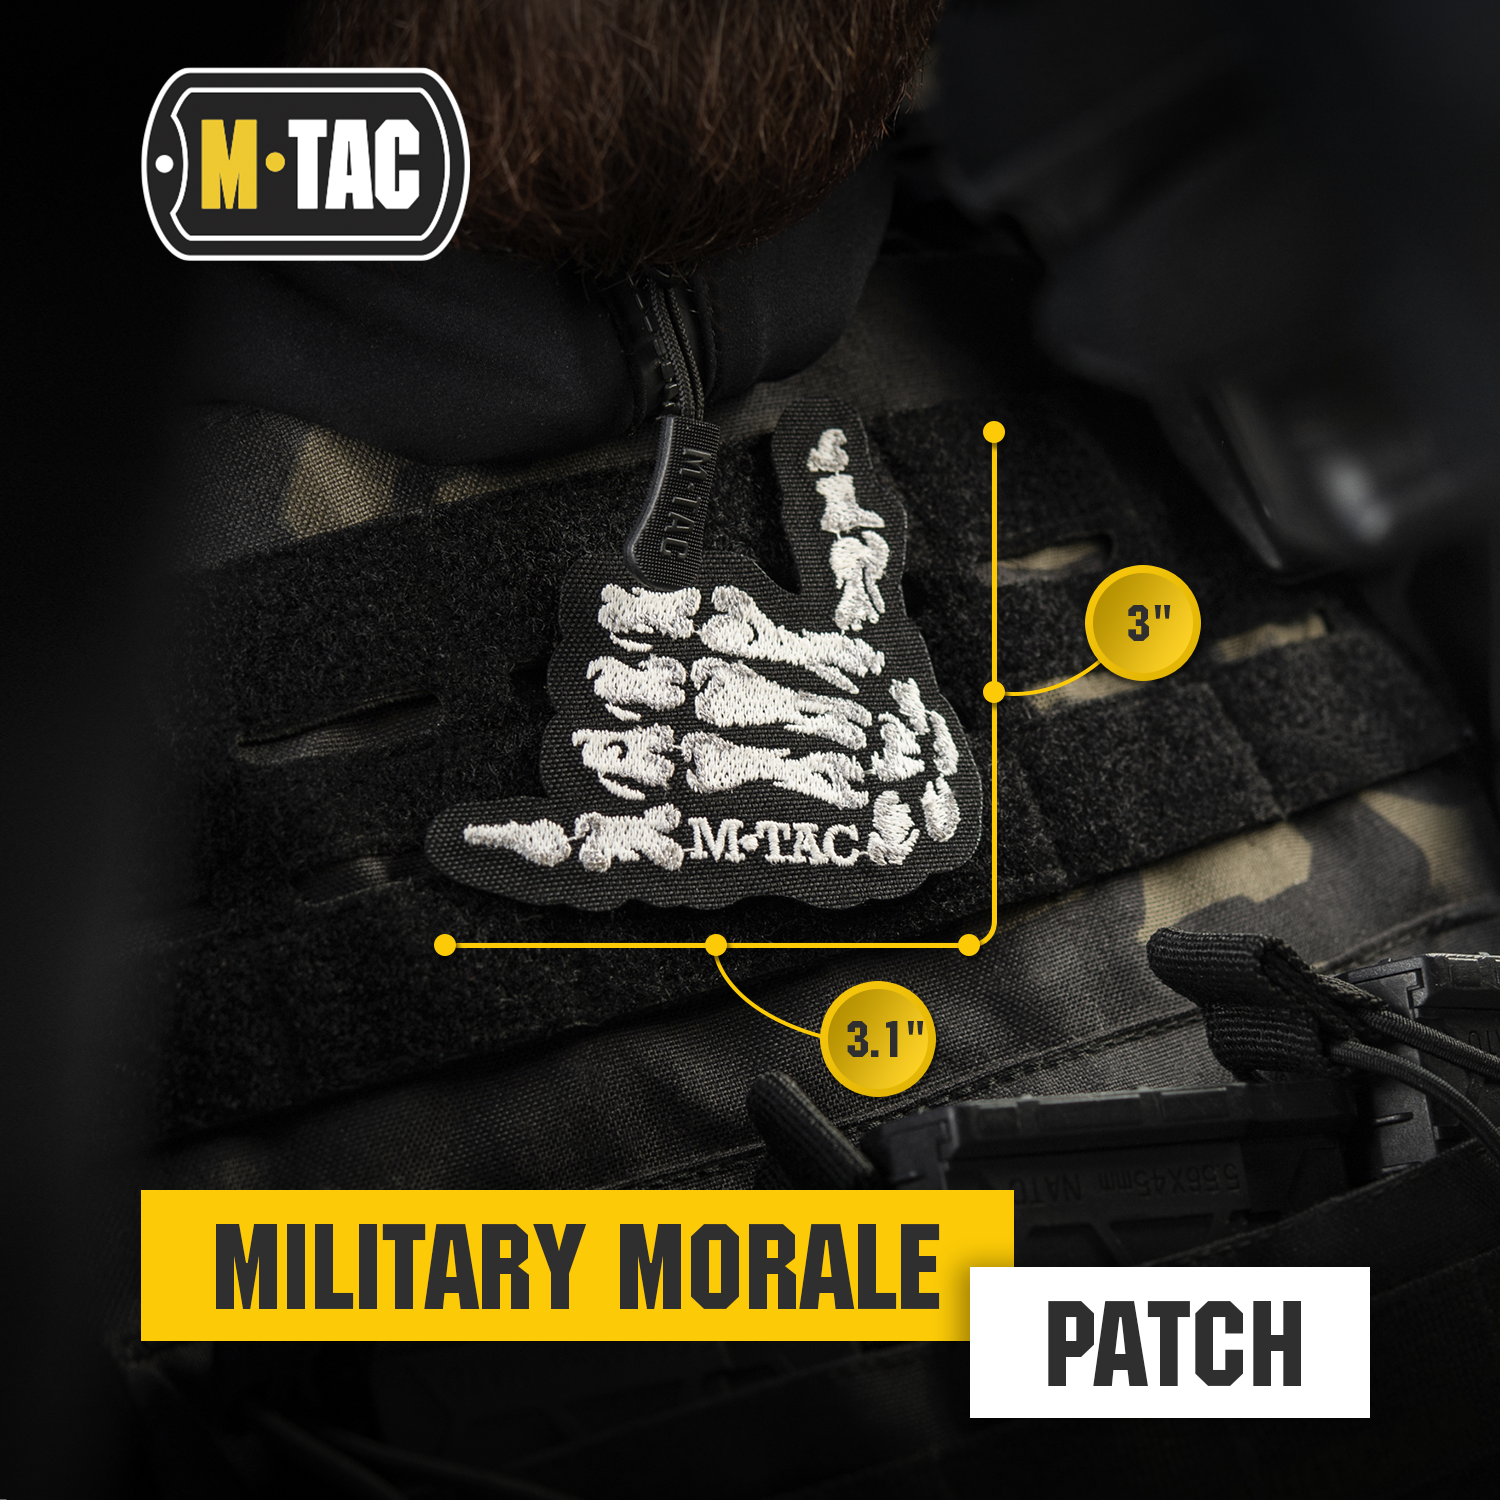 Velcro patch for addition of multiple patches